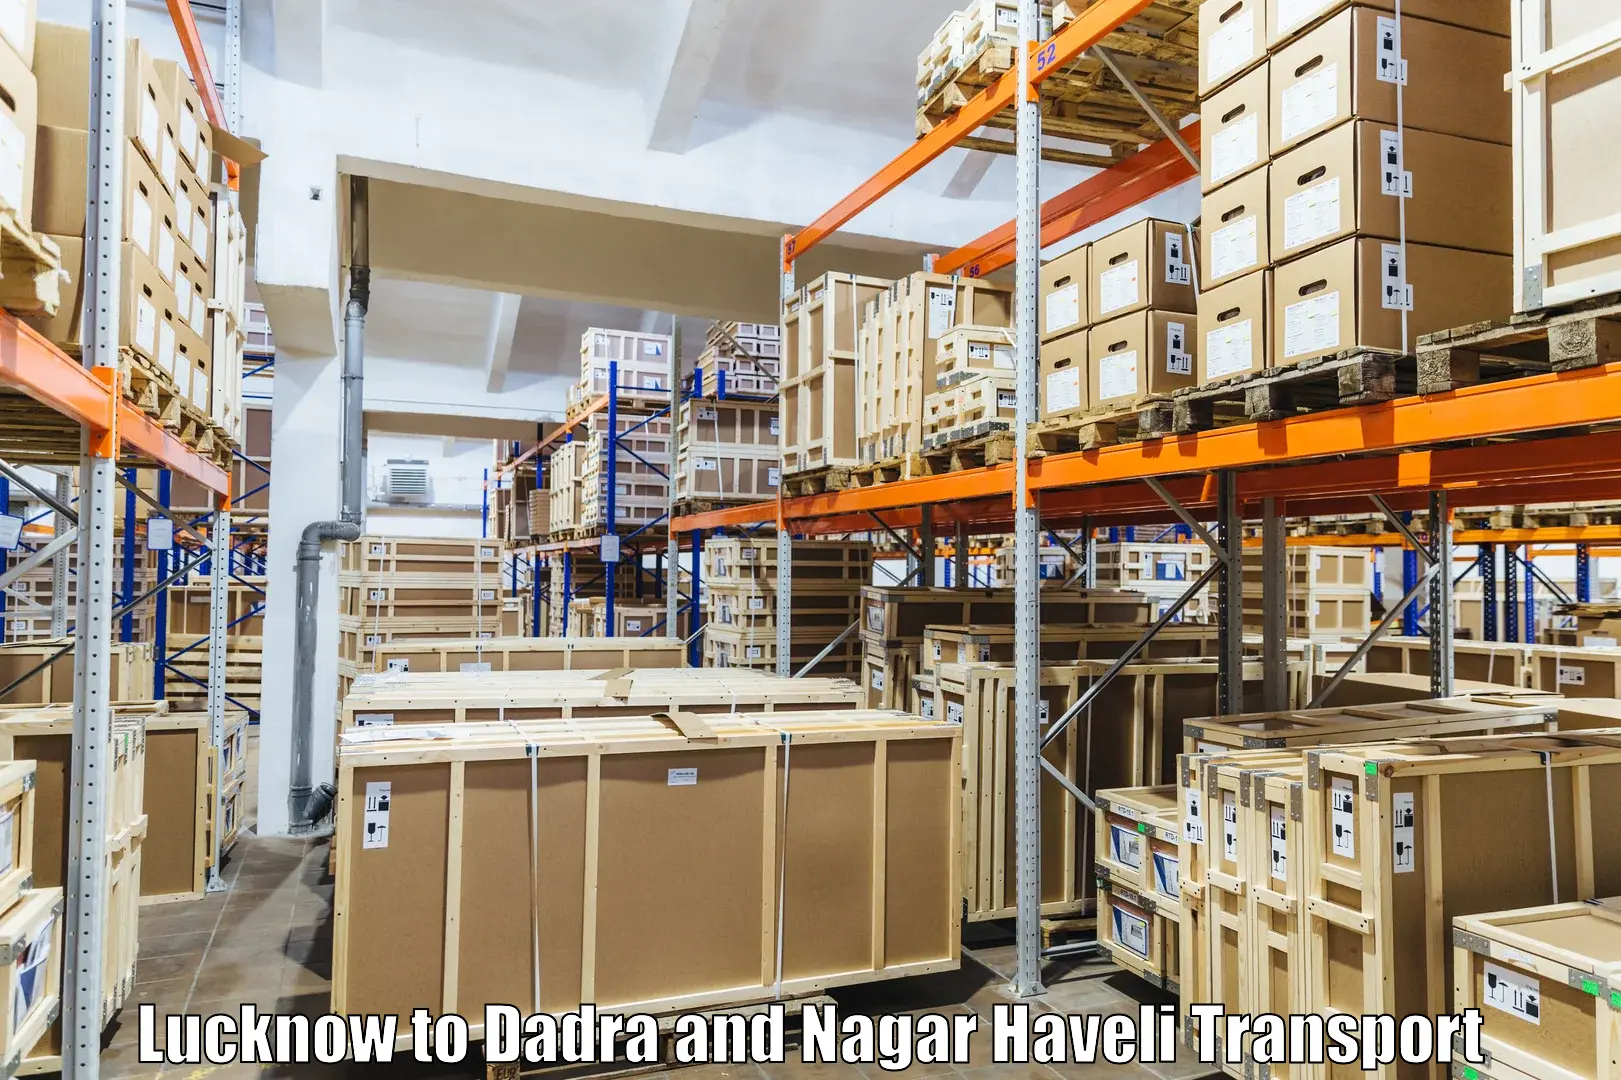 Express transport services Lucknow to Dadra and Nagar Haveli